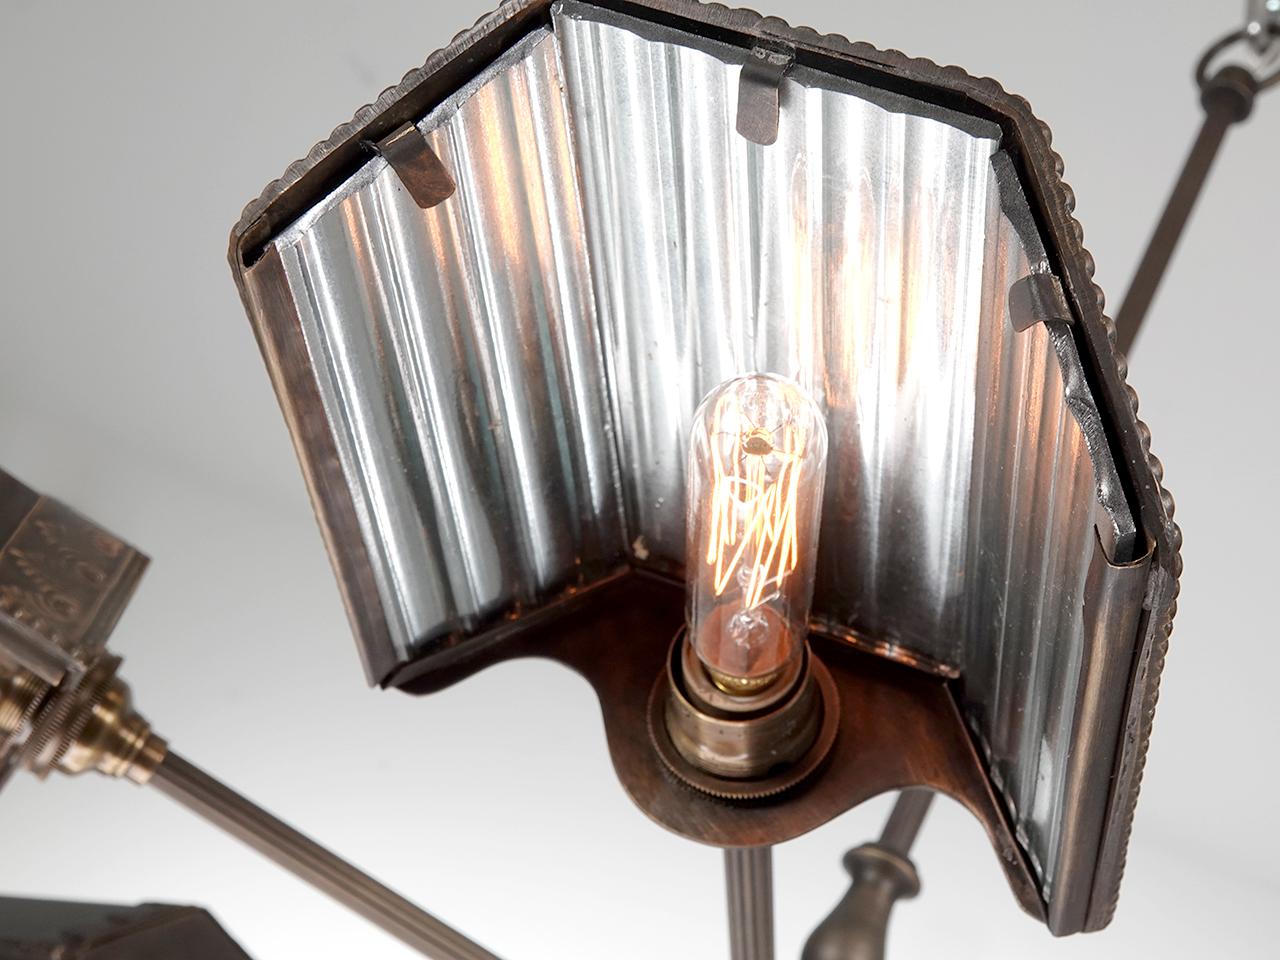 We were inspired The earliest reflector lamps manufactured by the companies Frink and Wheeler. over 100 years ago these small mirrored shades could be found lining a Vaudeville stage and were known as Foot Lights. Each shade contains 3 shallow